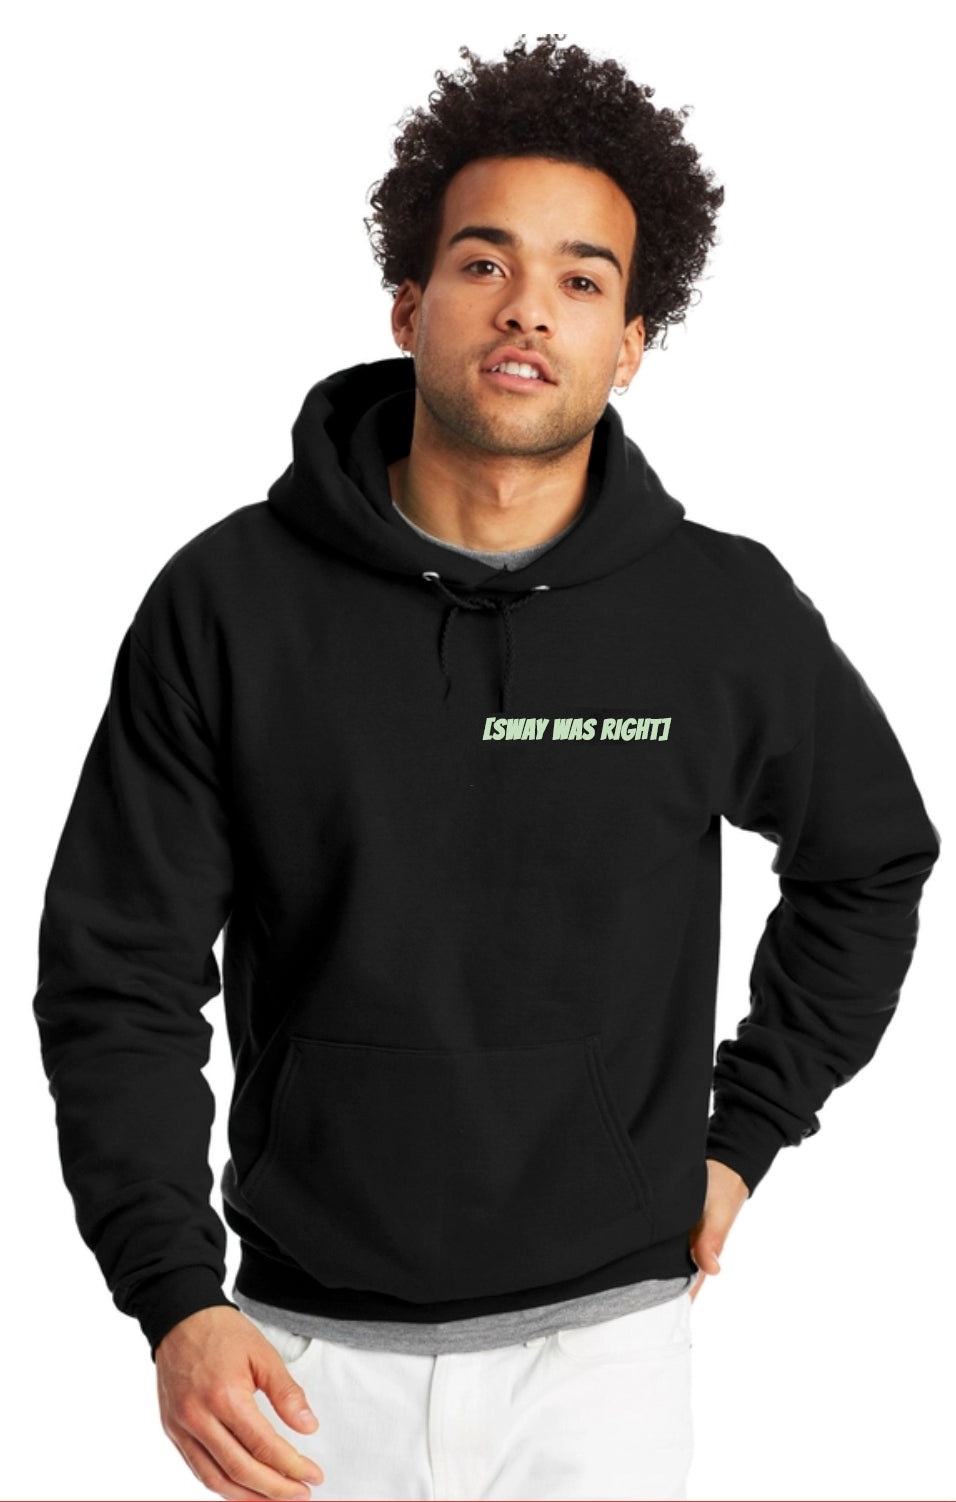 [SWAY WAS RIGHT] Hoodie